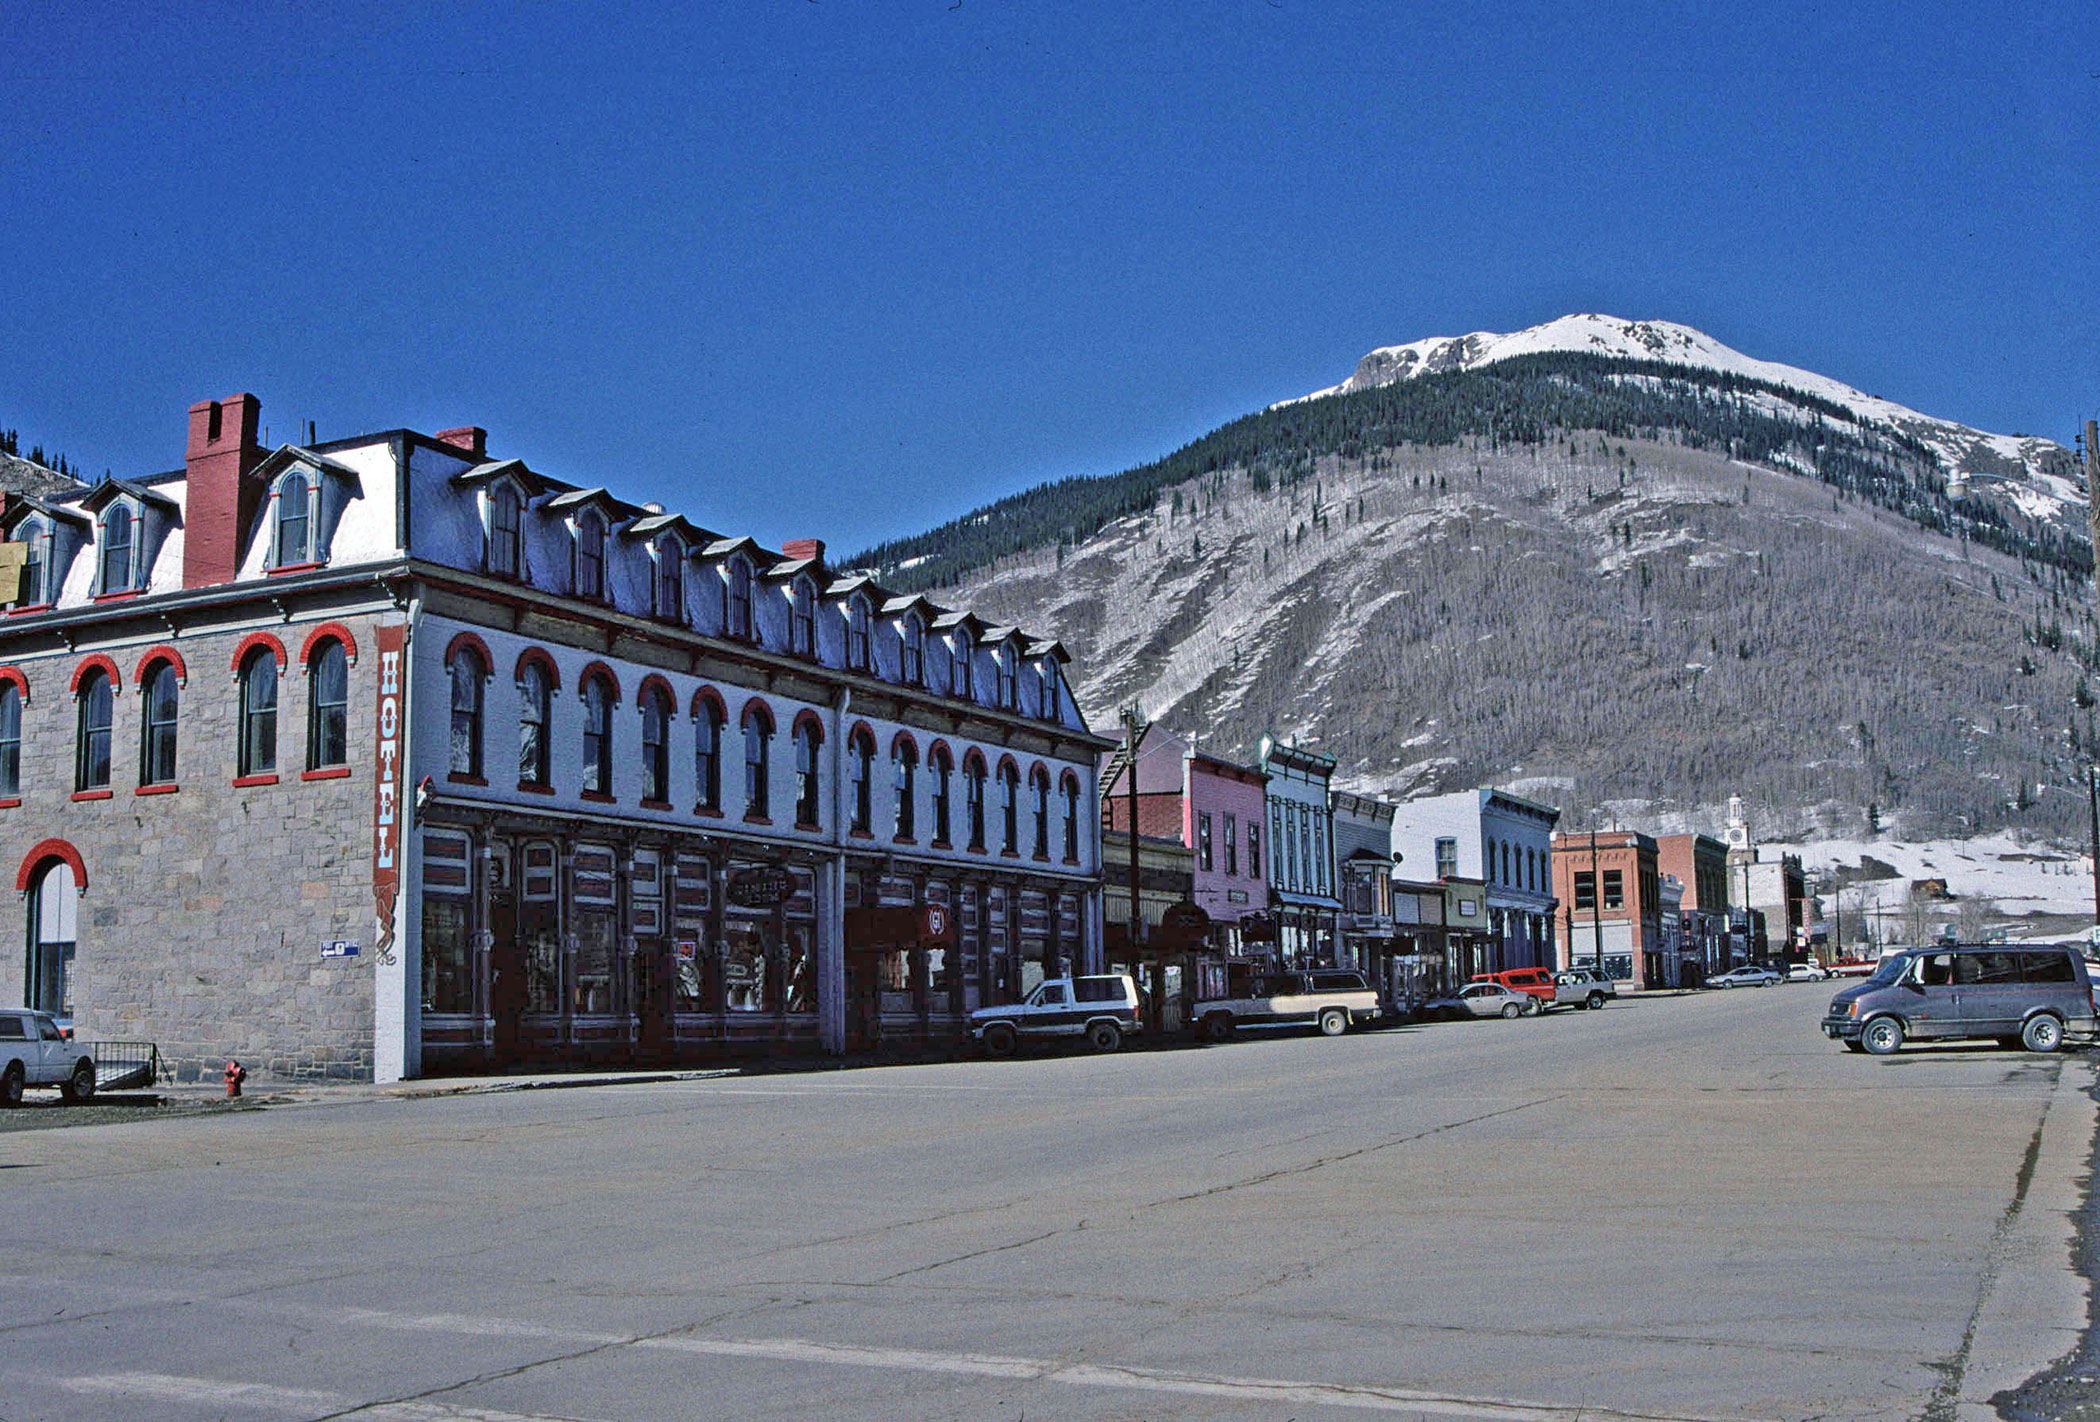 A view of the district with many buildings and a mountain in the background and snow in the foreground. The building in front has red trim and a mansard roof with dormers coming out.